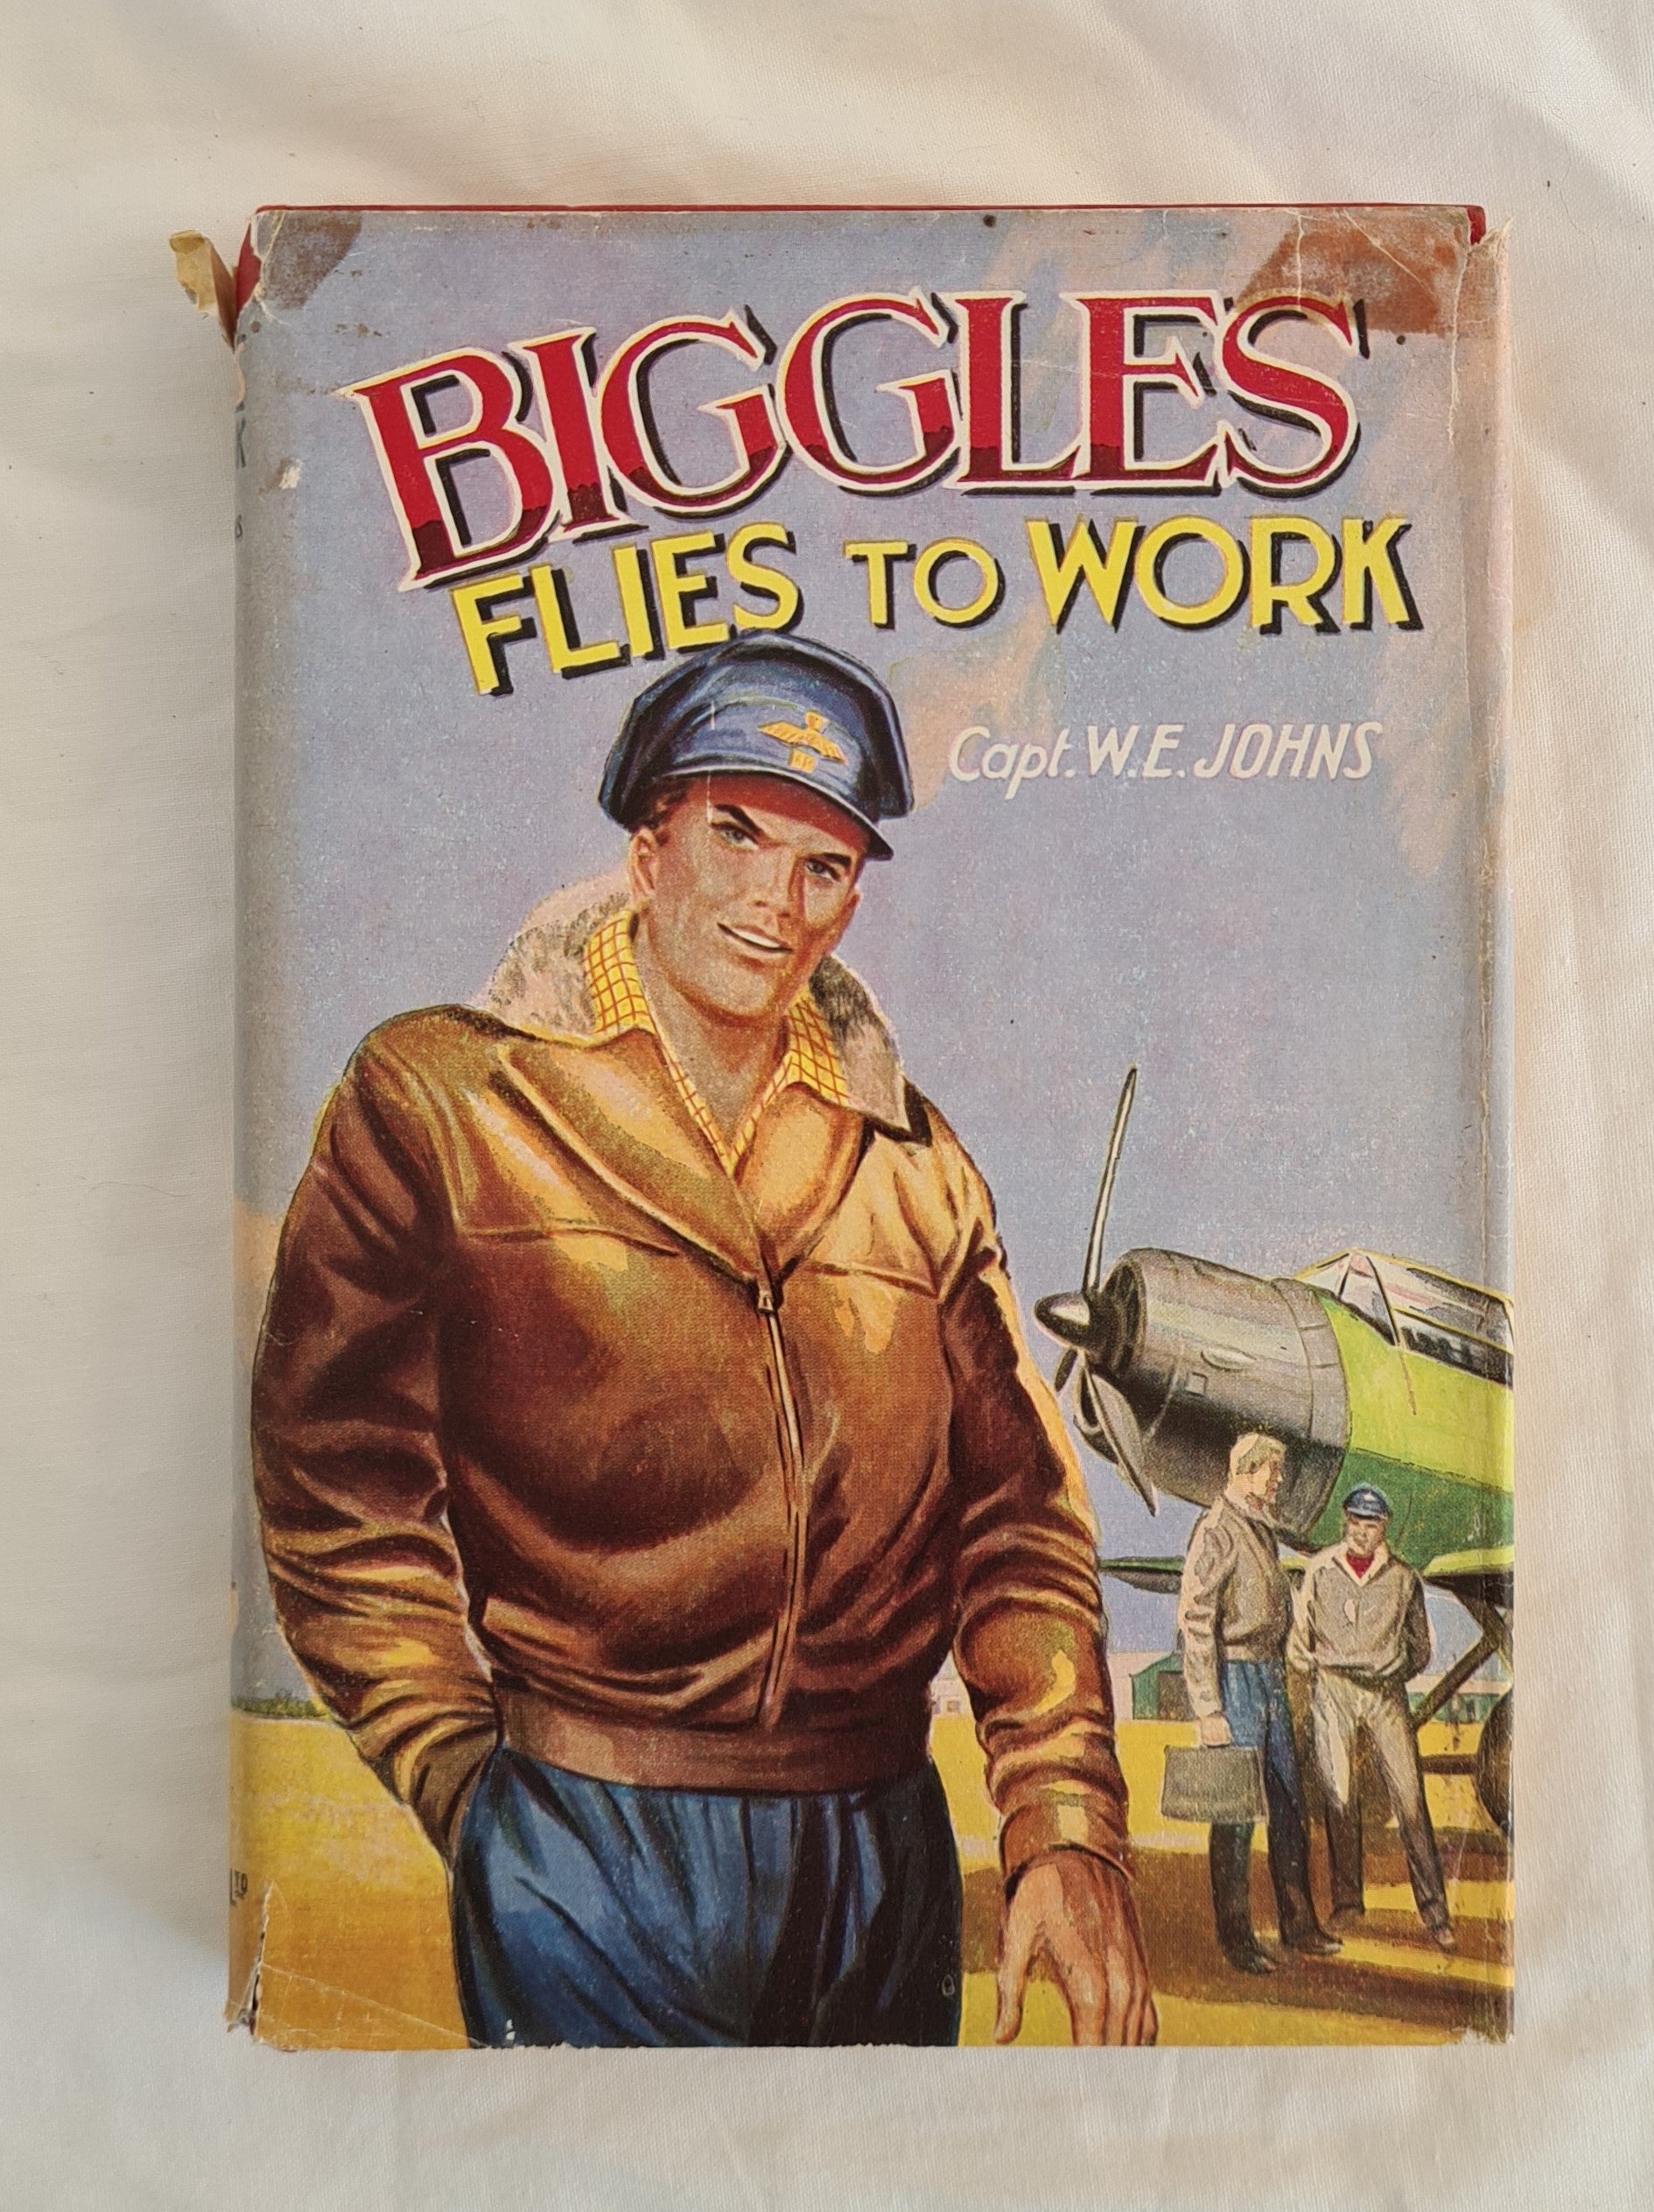 Biggles Flies to Work  by Capt. W. E. Johns  Some Unusual Cases of Biggles and his Air Police